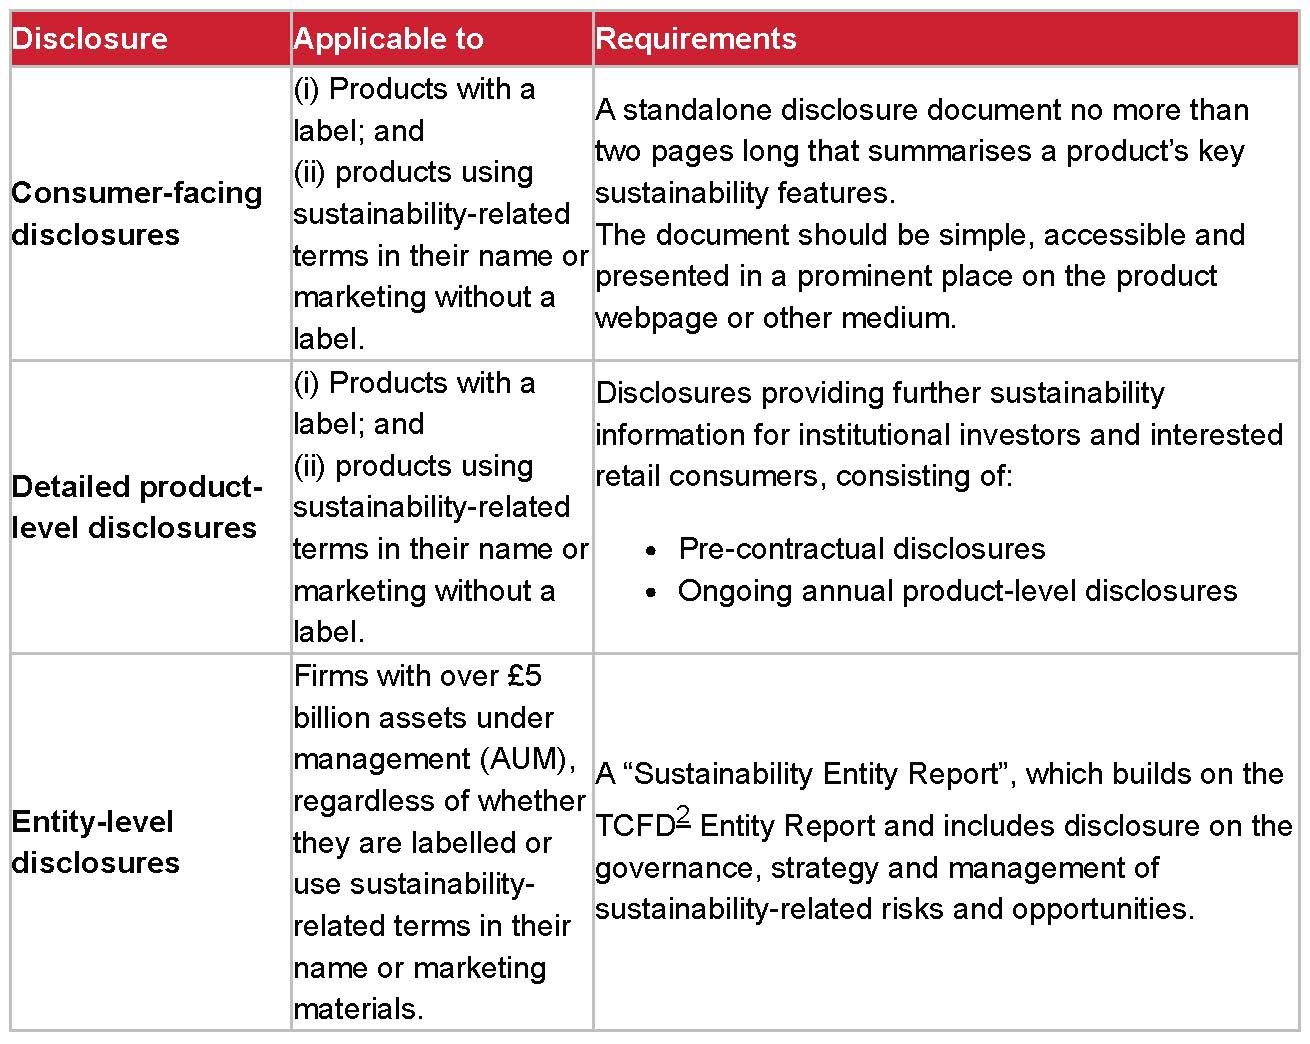 Table setting out the three-tiered system of sustainability information disclosures for UK asset managers and their funds: 1) Consumer-facing disclosures, 2) Detailed product-level disclosures and 3) Entity-level disclosures. 